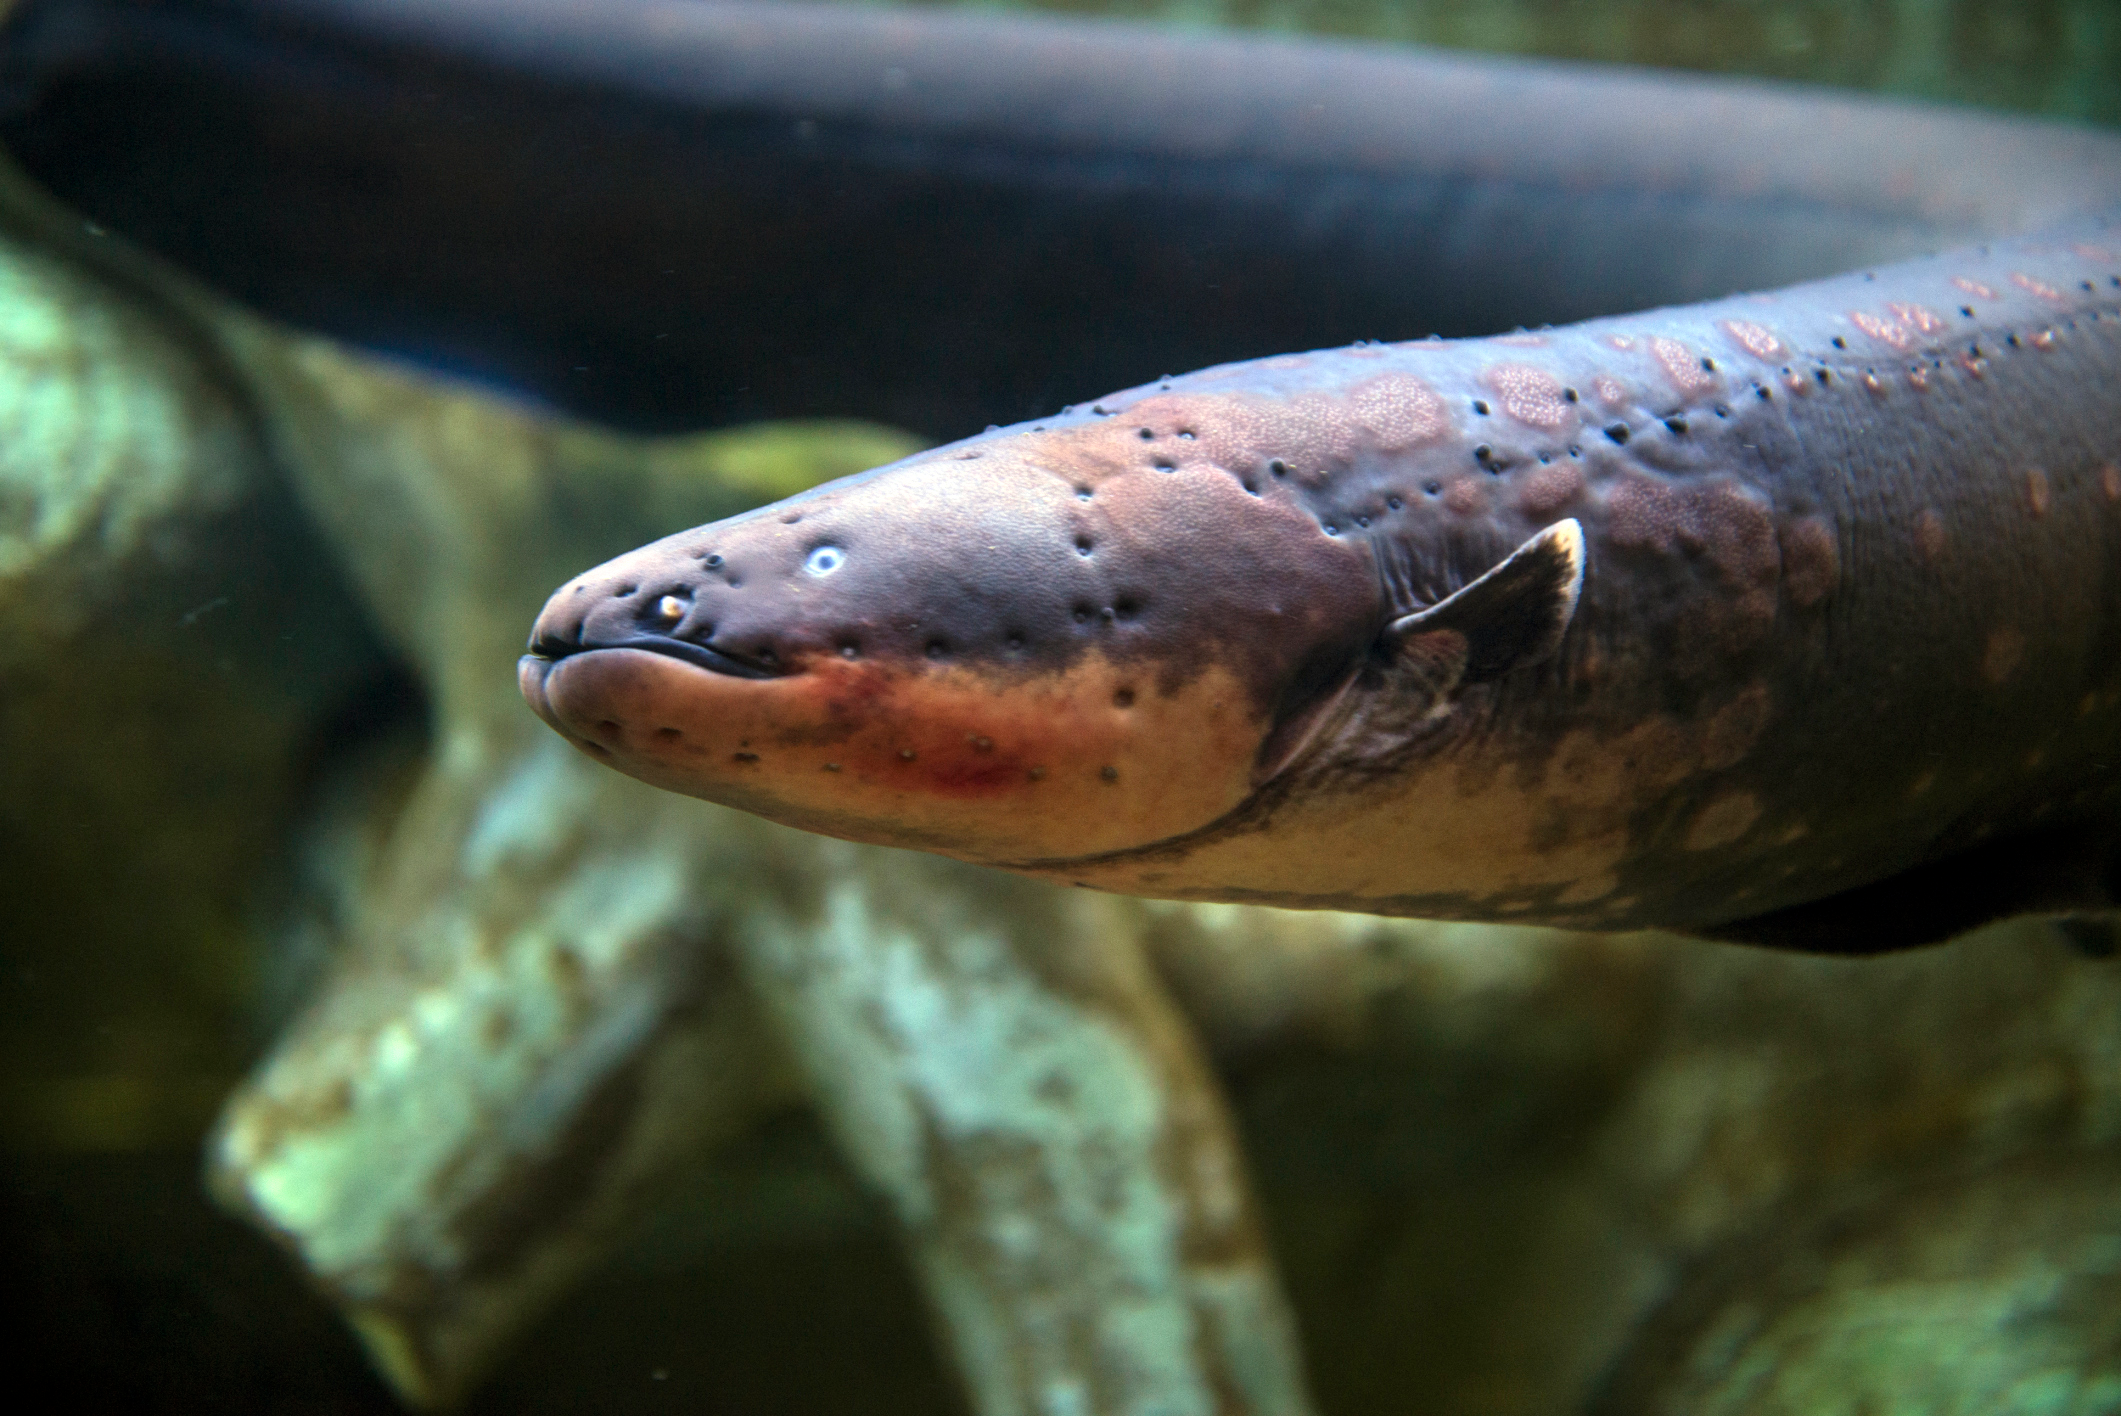 Freshwater aquarium eels- are they really eels?